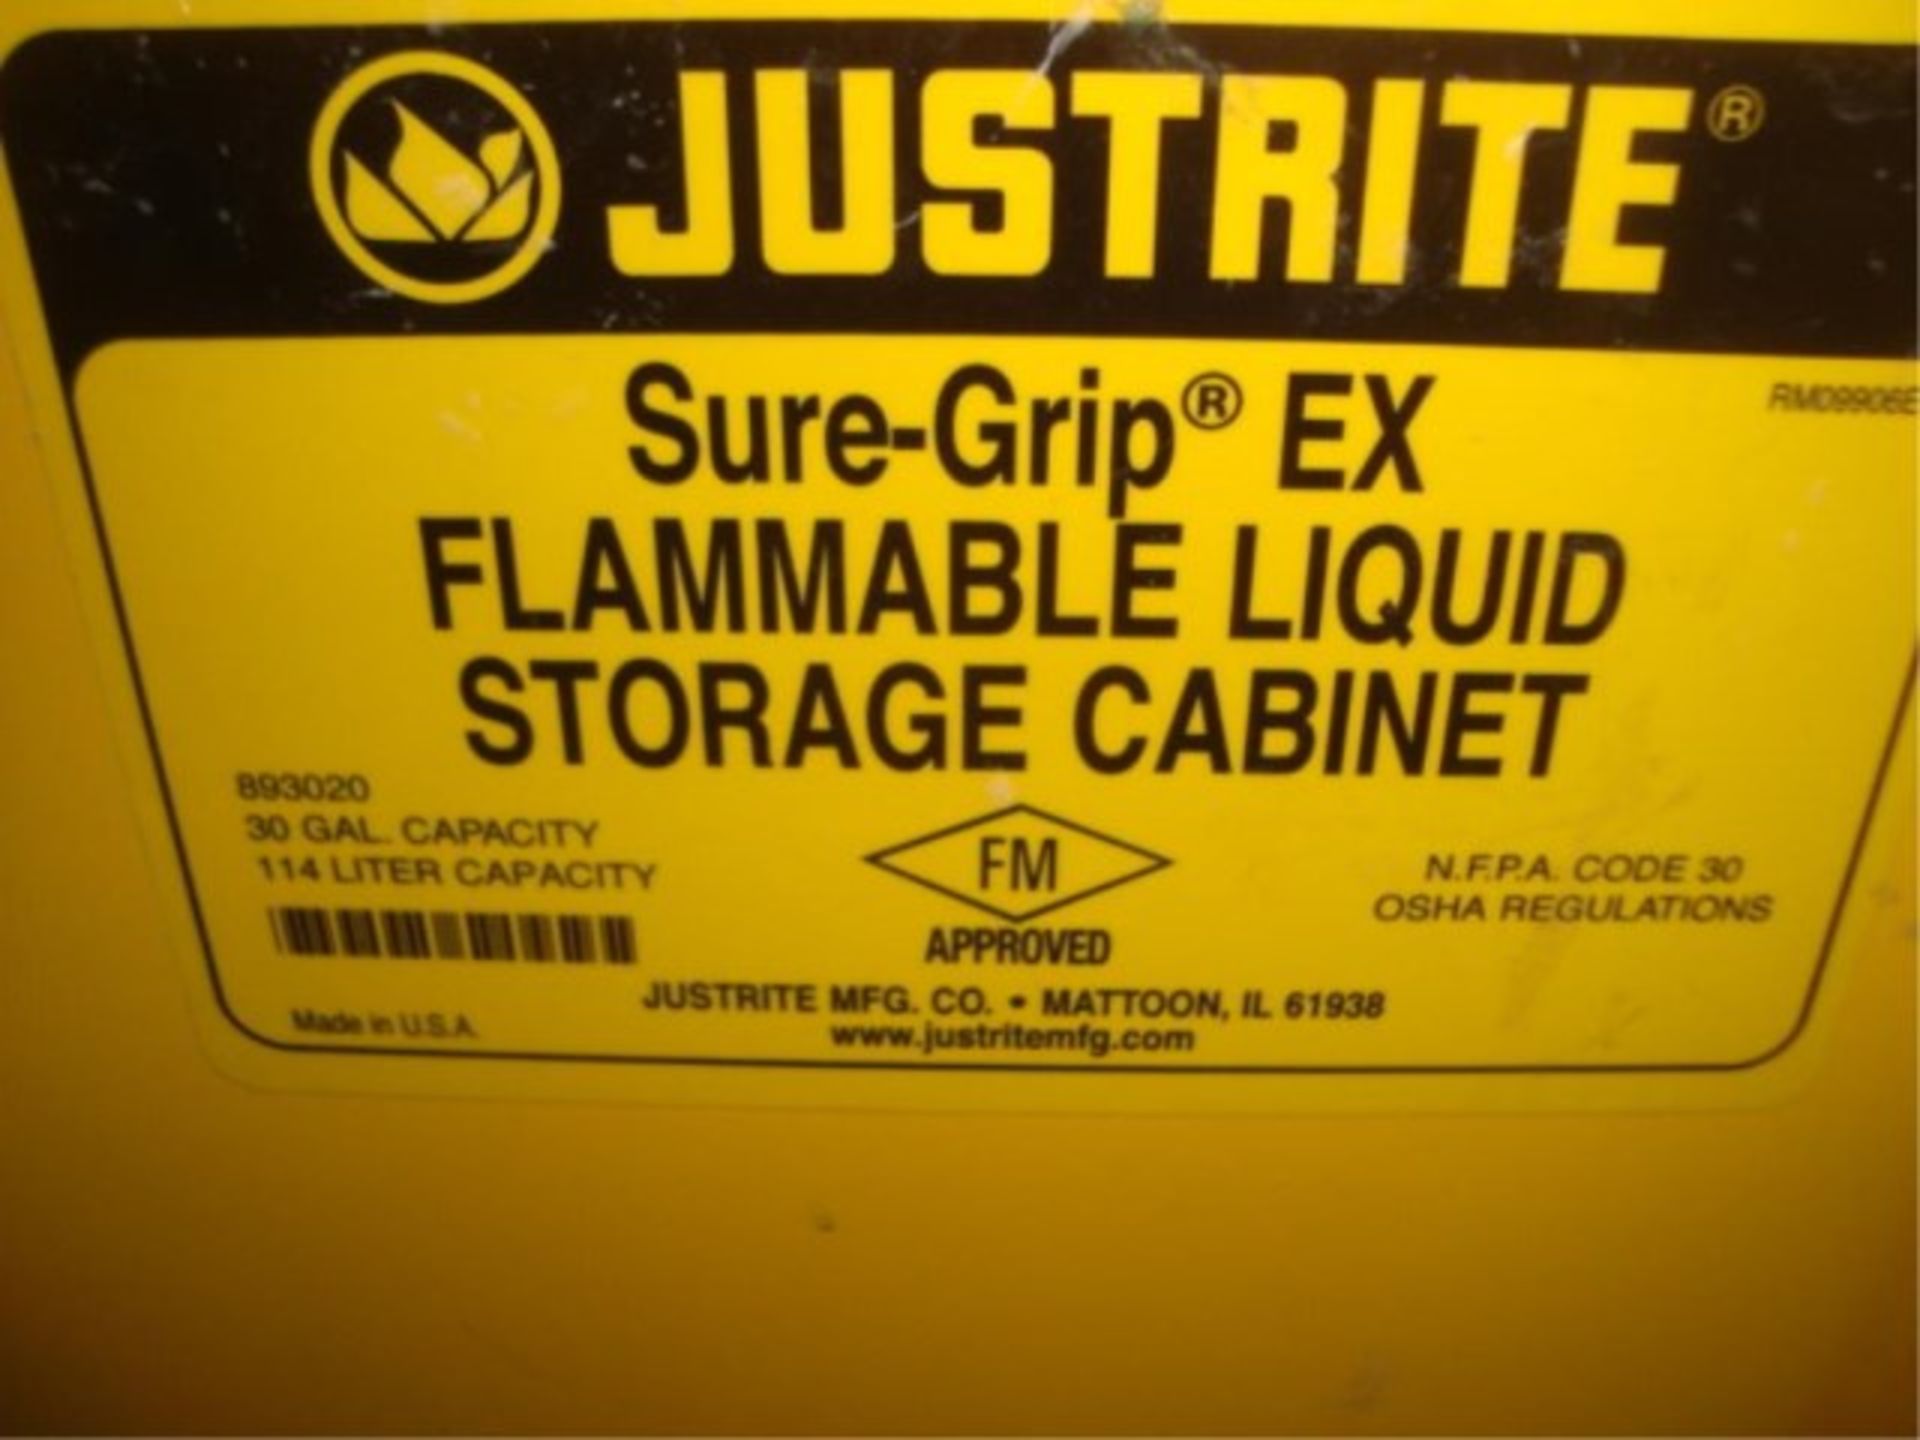 Flammables Storage Cabinets - Image 9 of 12